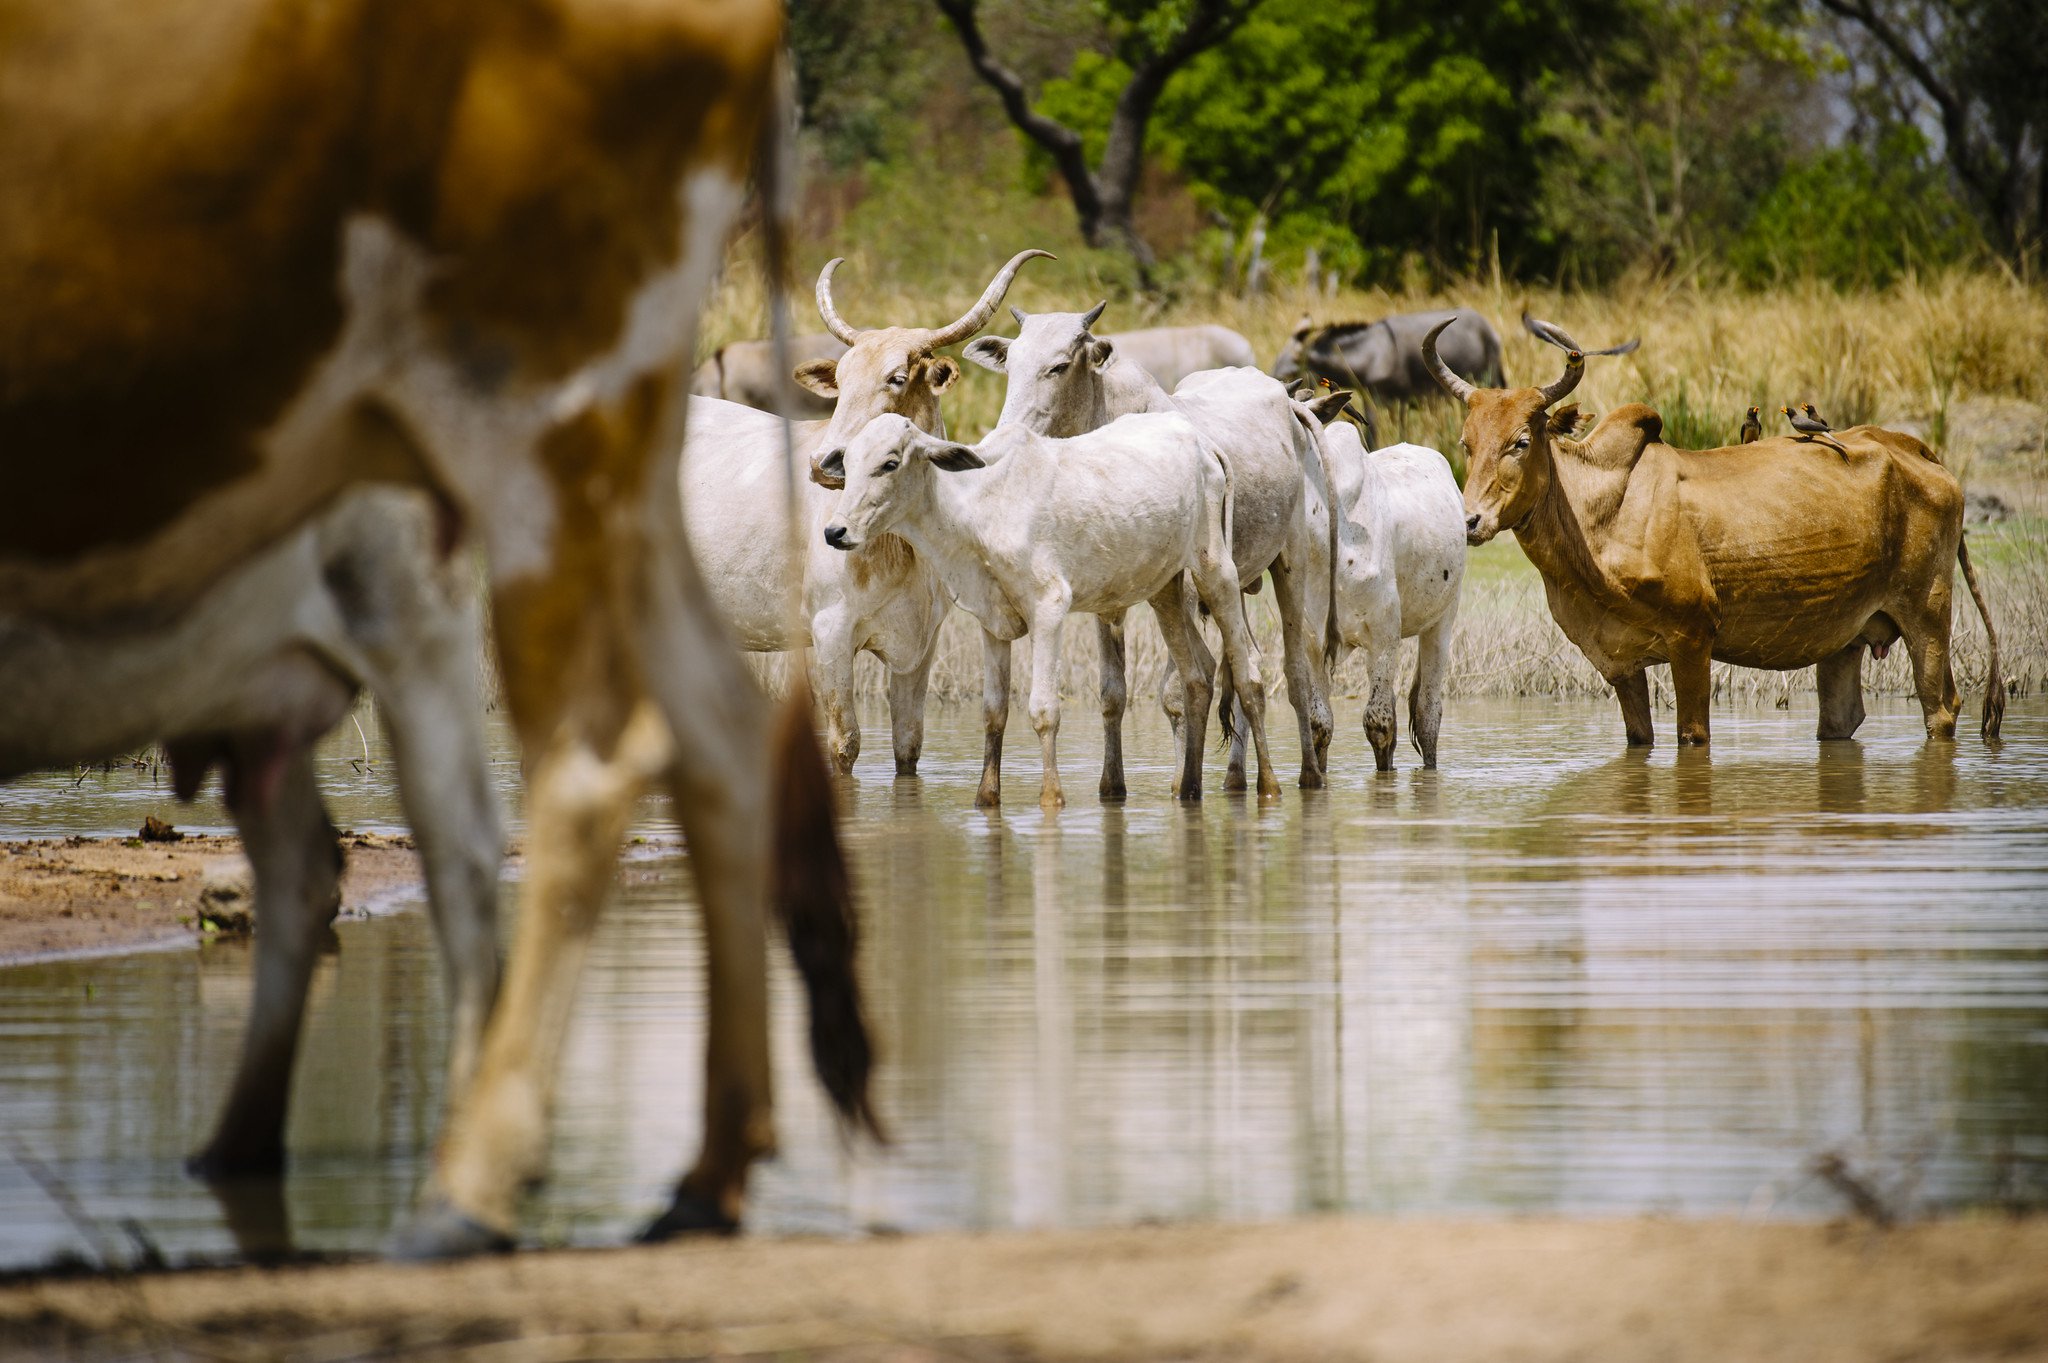  Cattle cool down in a reservoir, often the last water point during the hottest and driest months of the year, in Zorro village, Burkina Faso